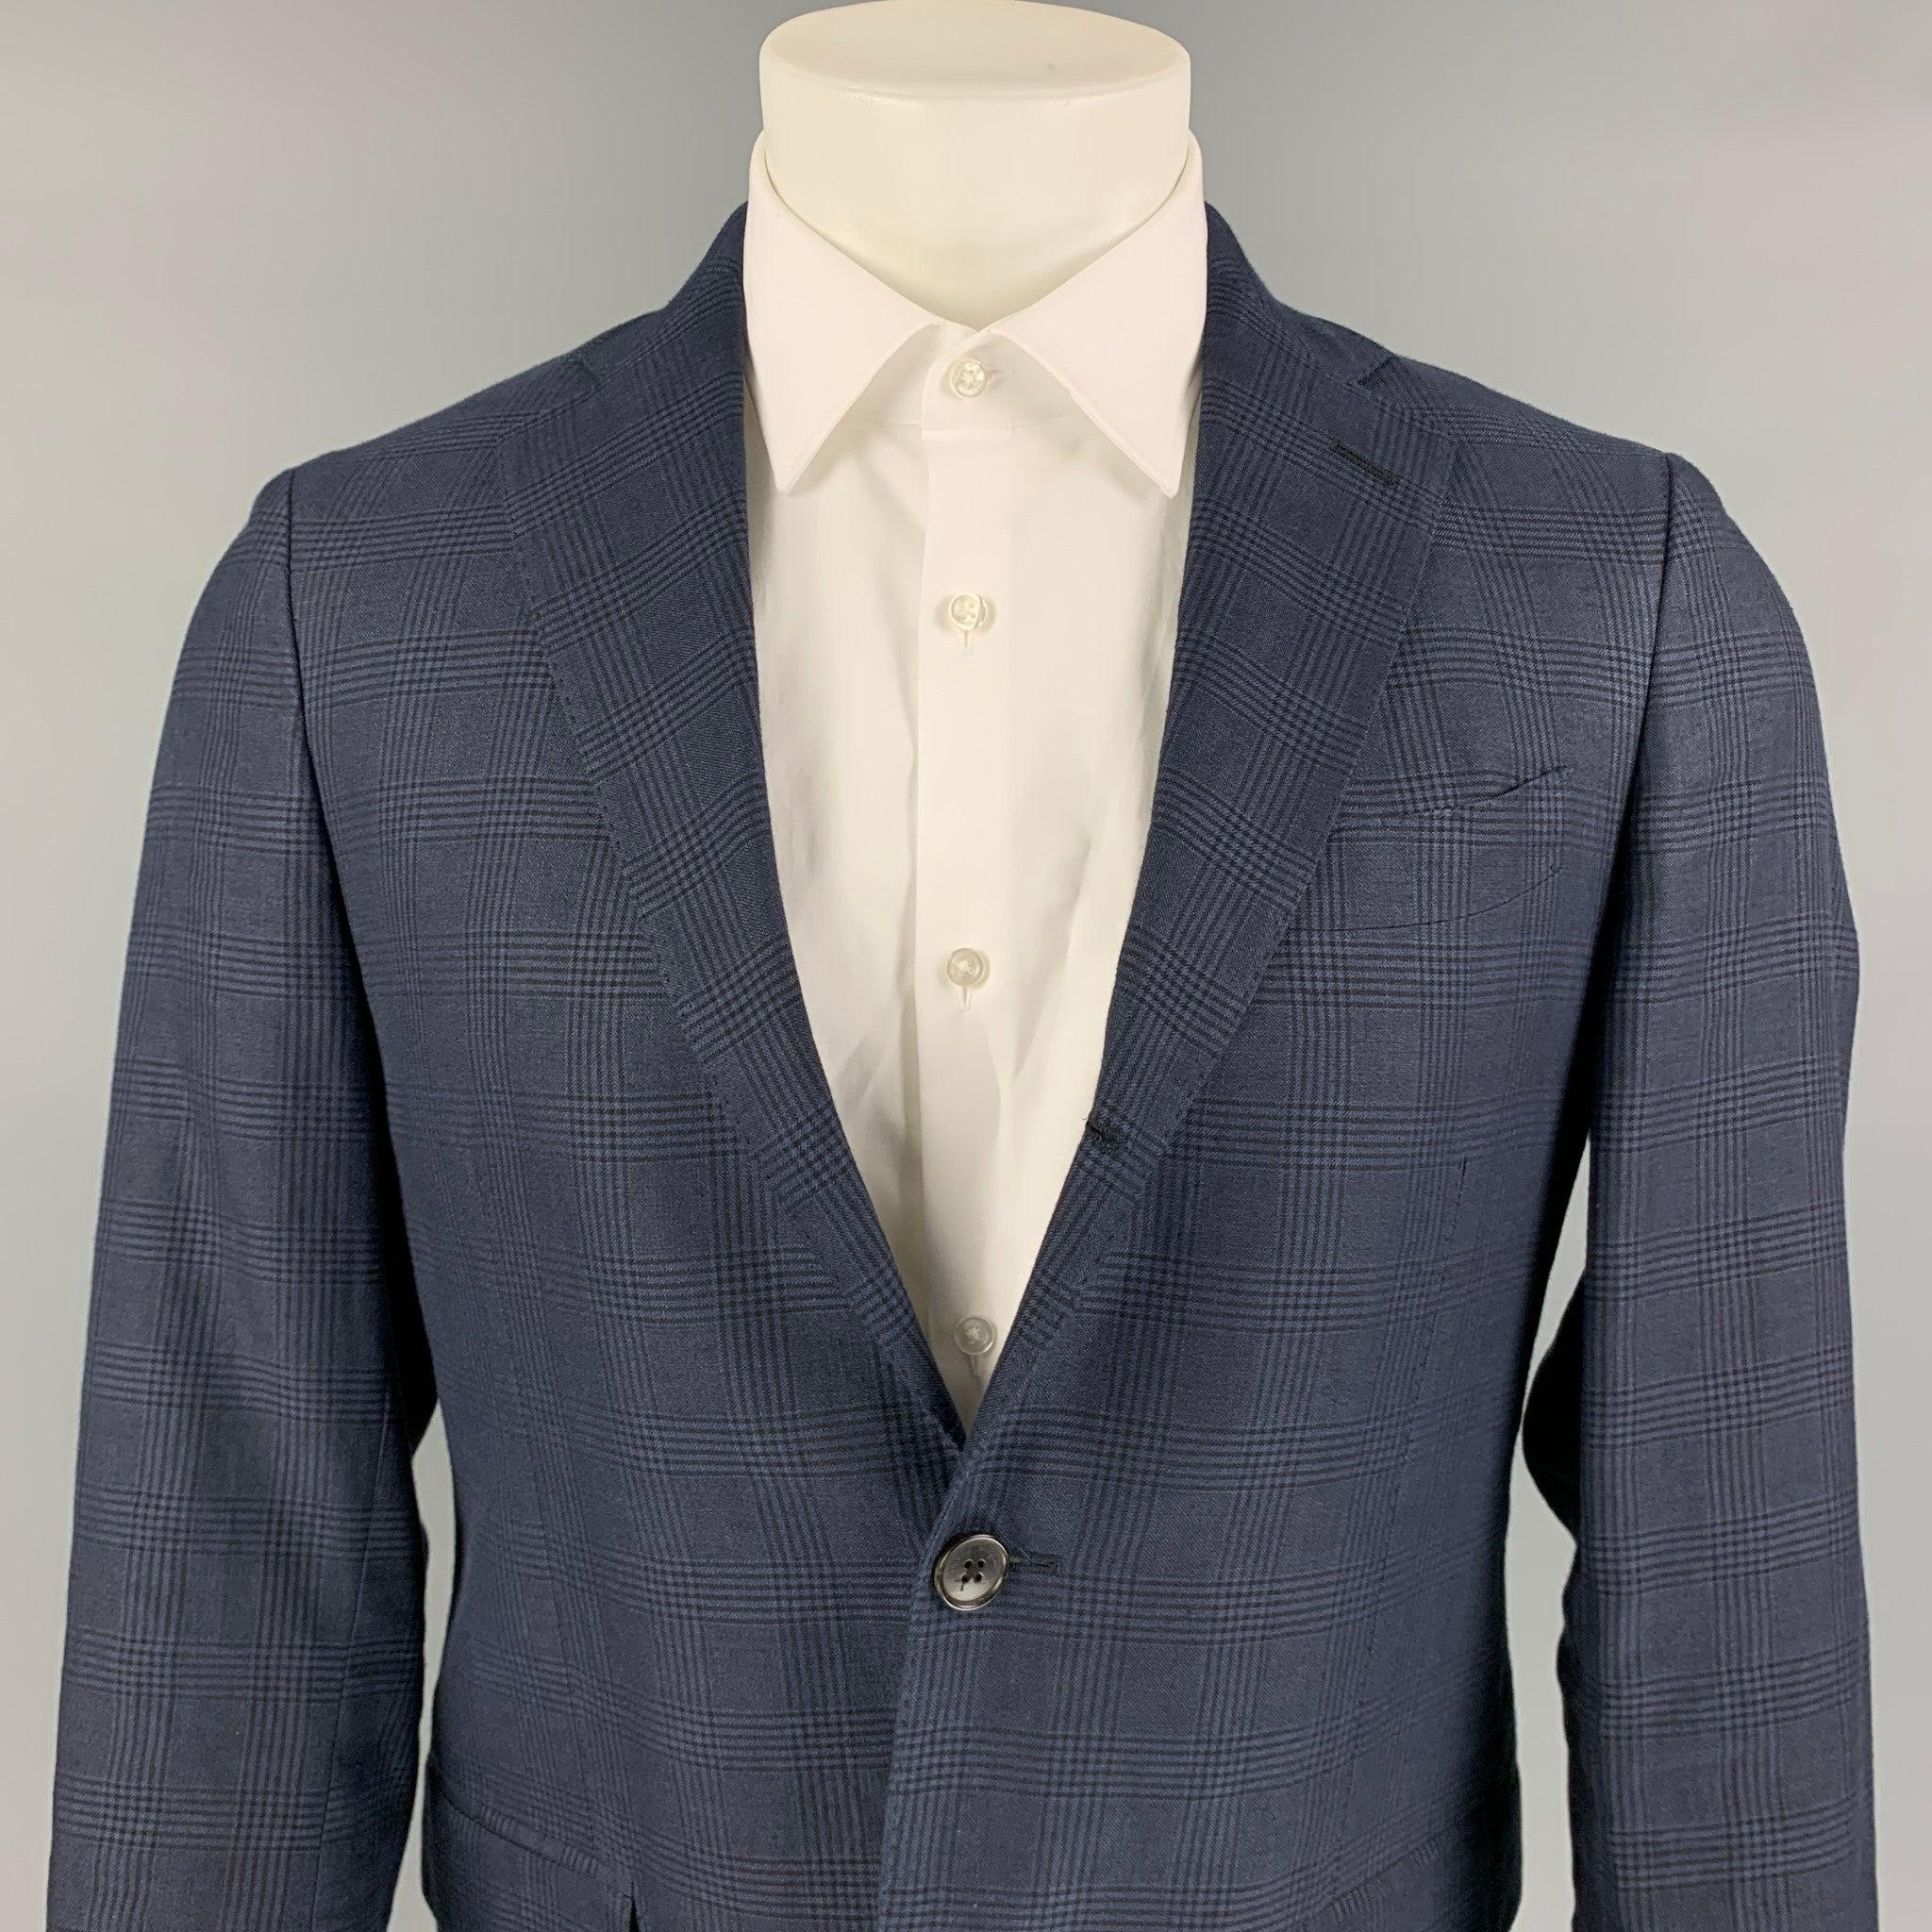 SALVATORE FERRAGAMO sport coat comes in a navy plaid linen blend with a full liner featuring a notch lapel, flap pockets, single back vent, and a three button closure. Made in Italy.
Very Good
Pre-Owned Condition. 

Marked:   48 

Measurements: 
